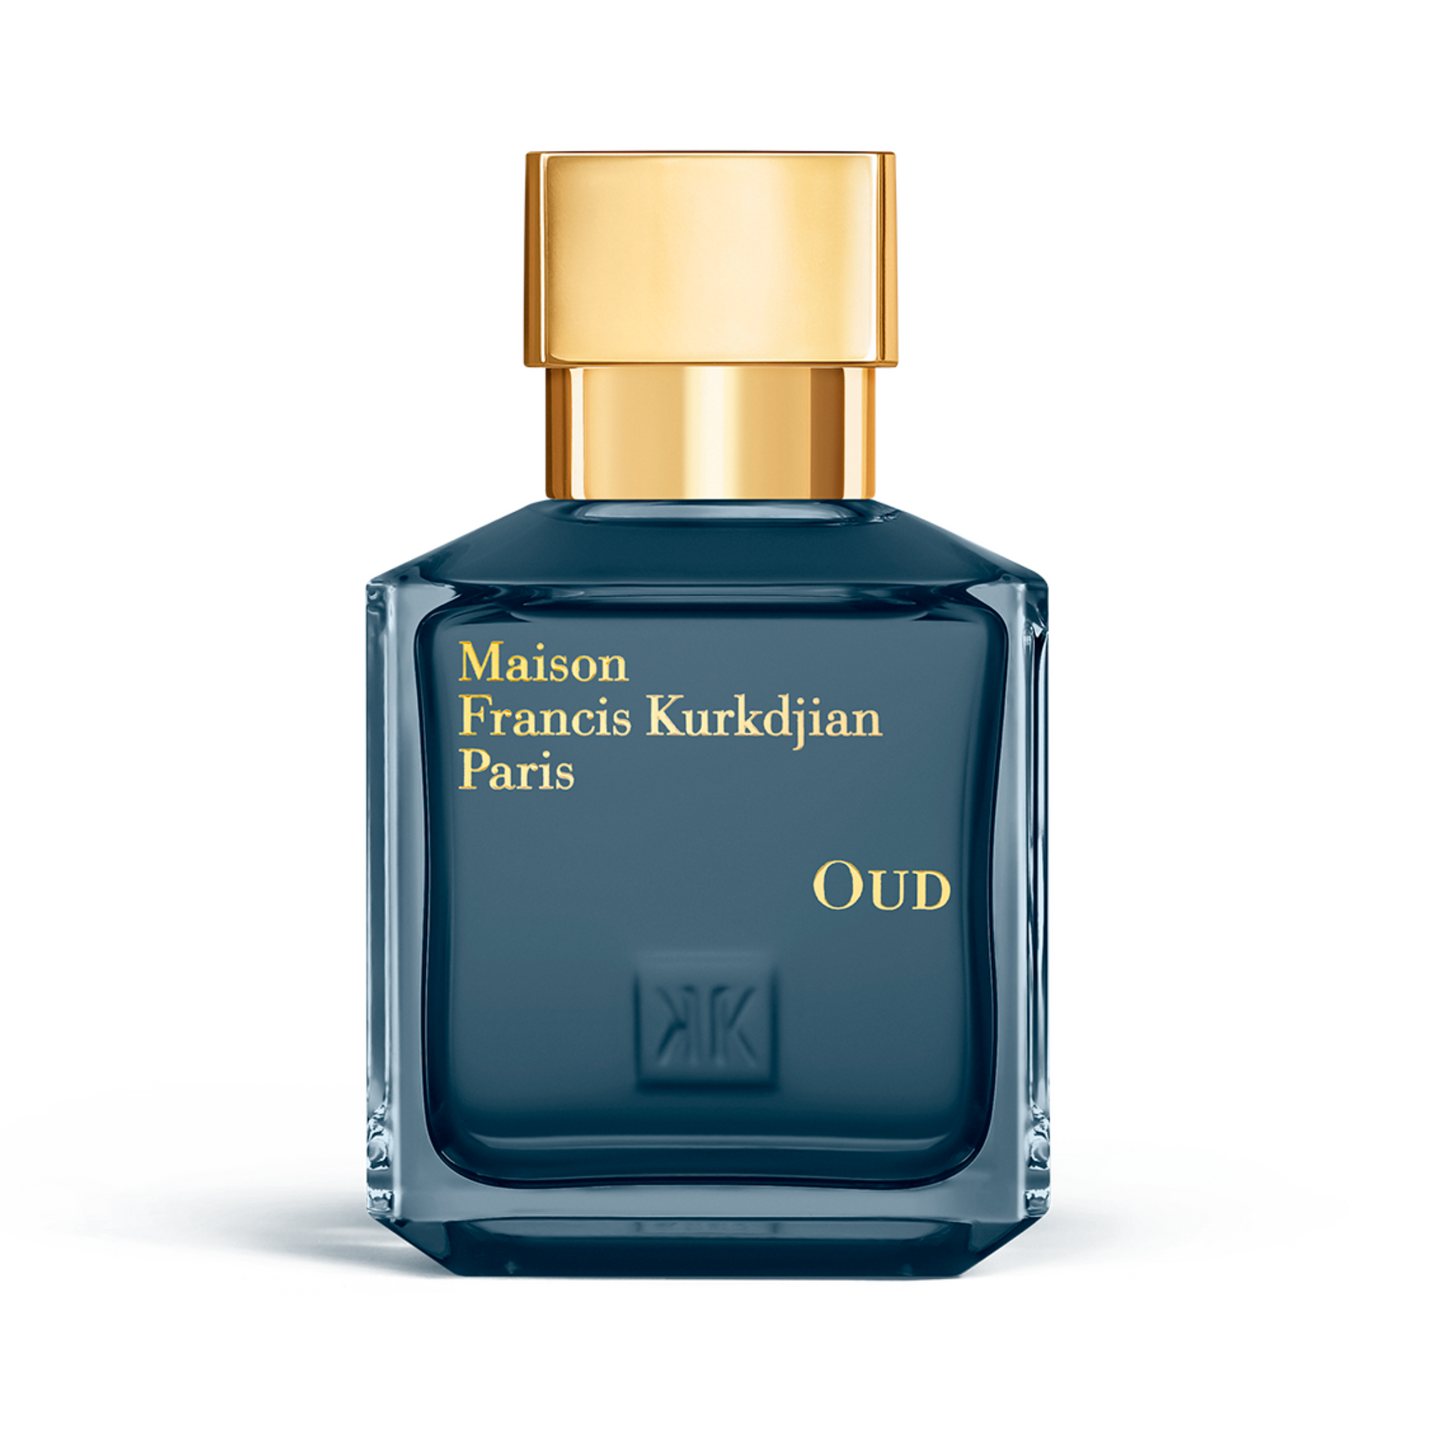 Primary image of Oud EDP